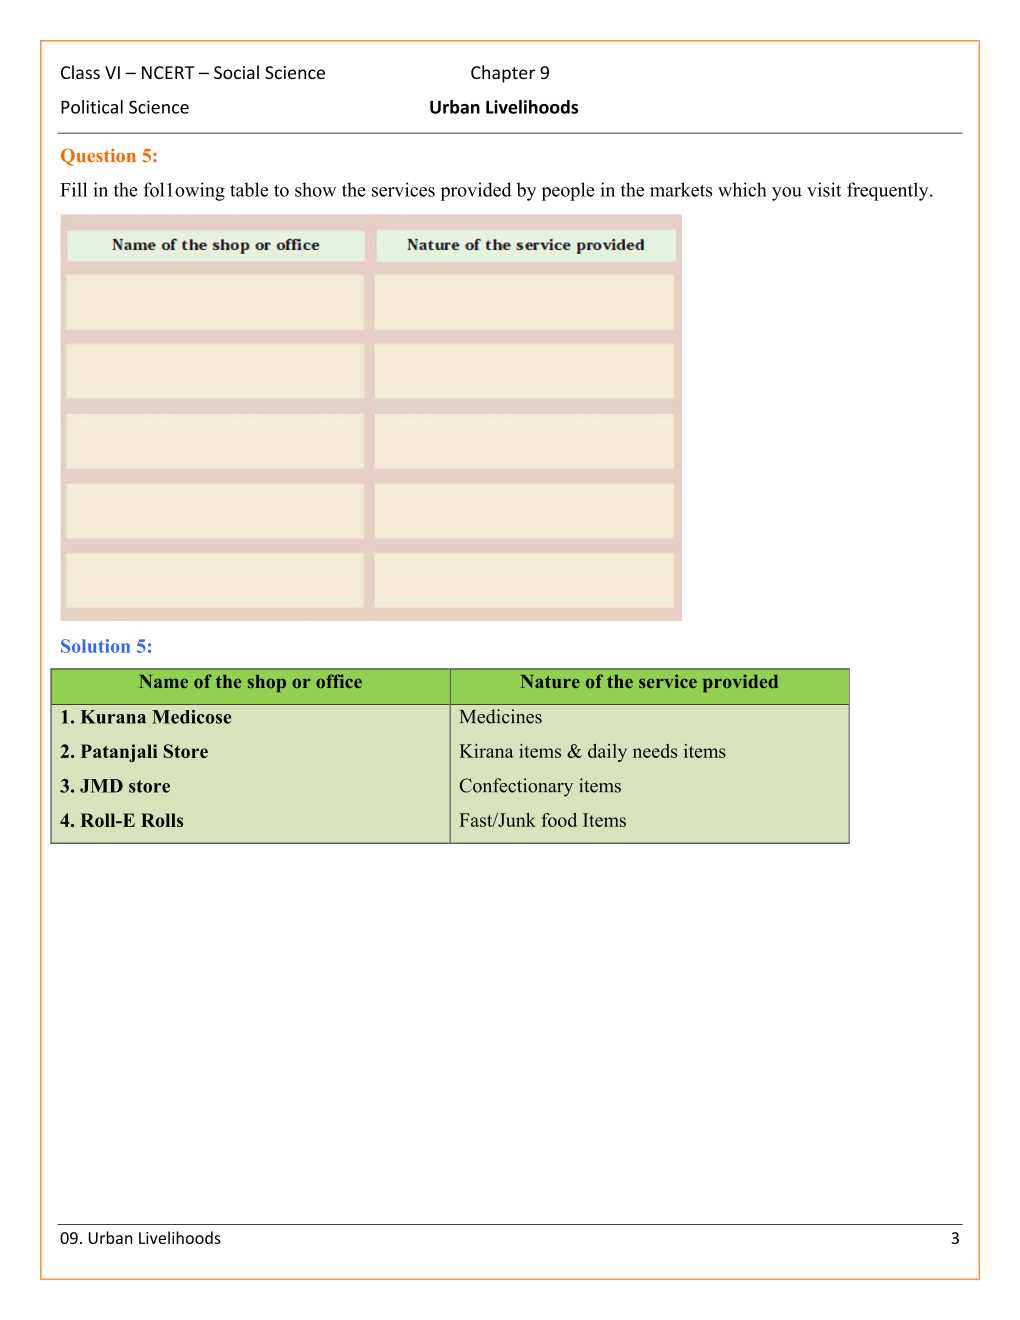 NCERT Solutions For Class 6 Social Science - Social and Political Life Chapter 9